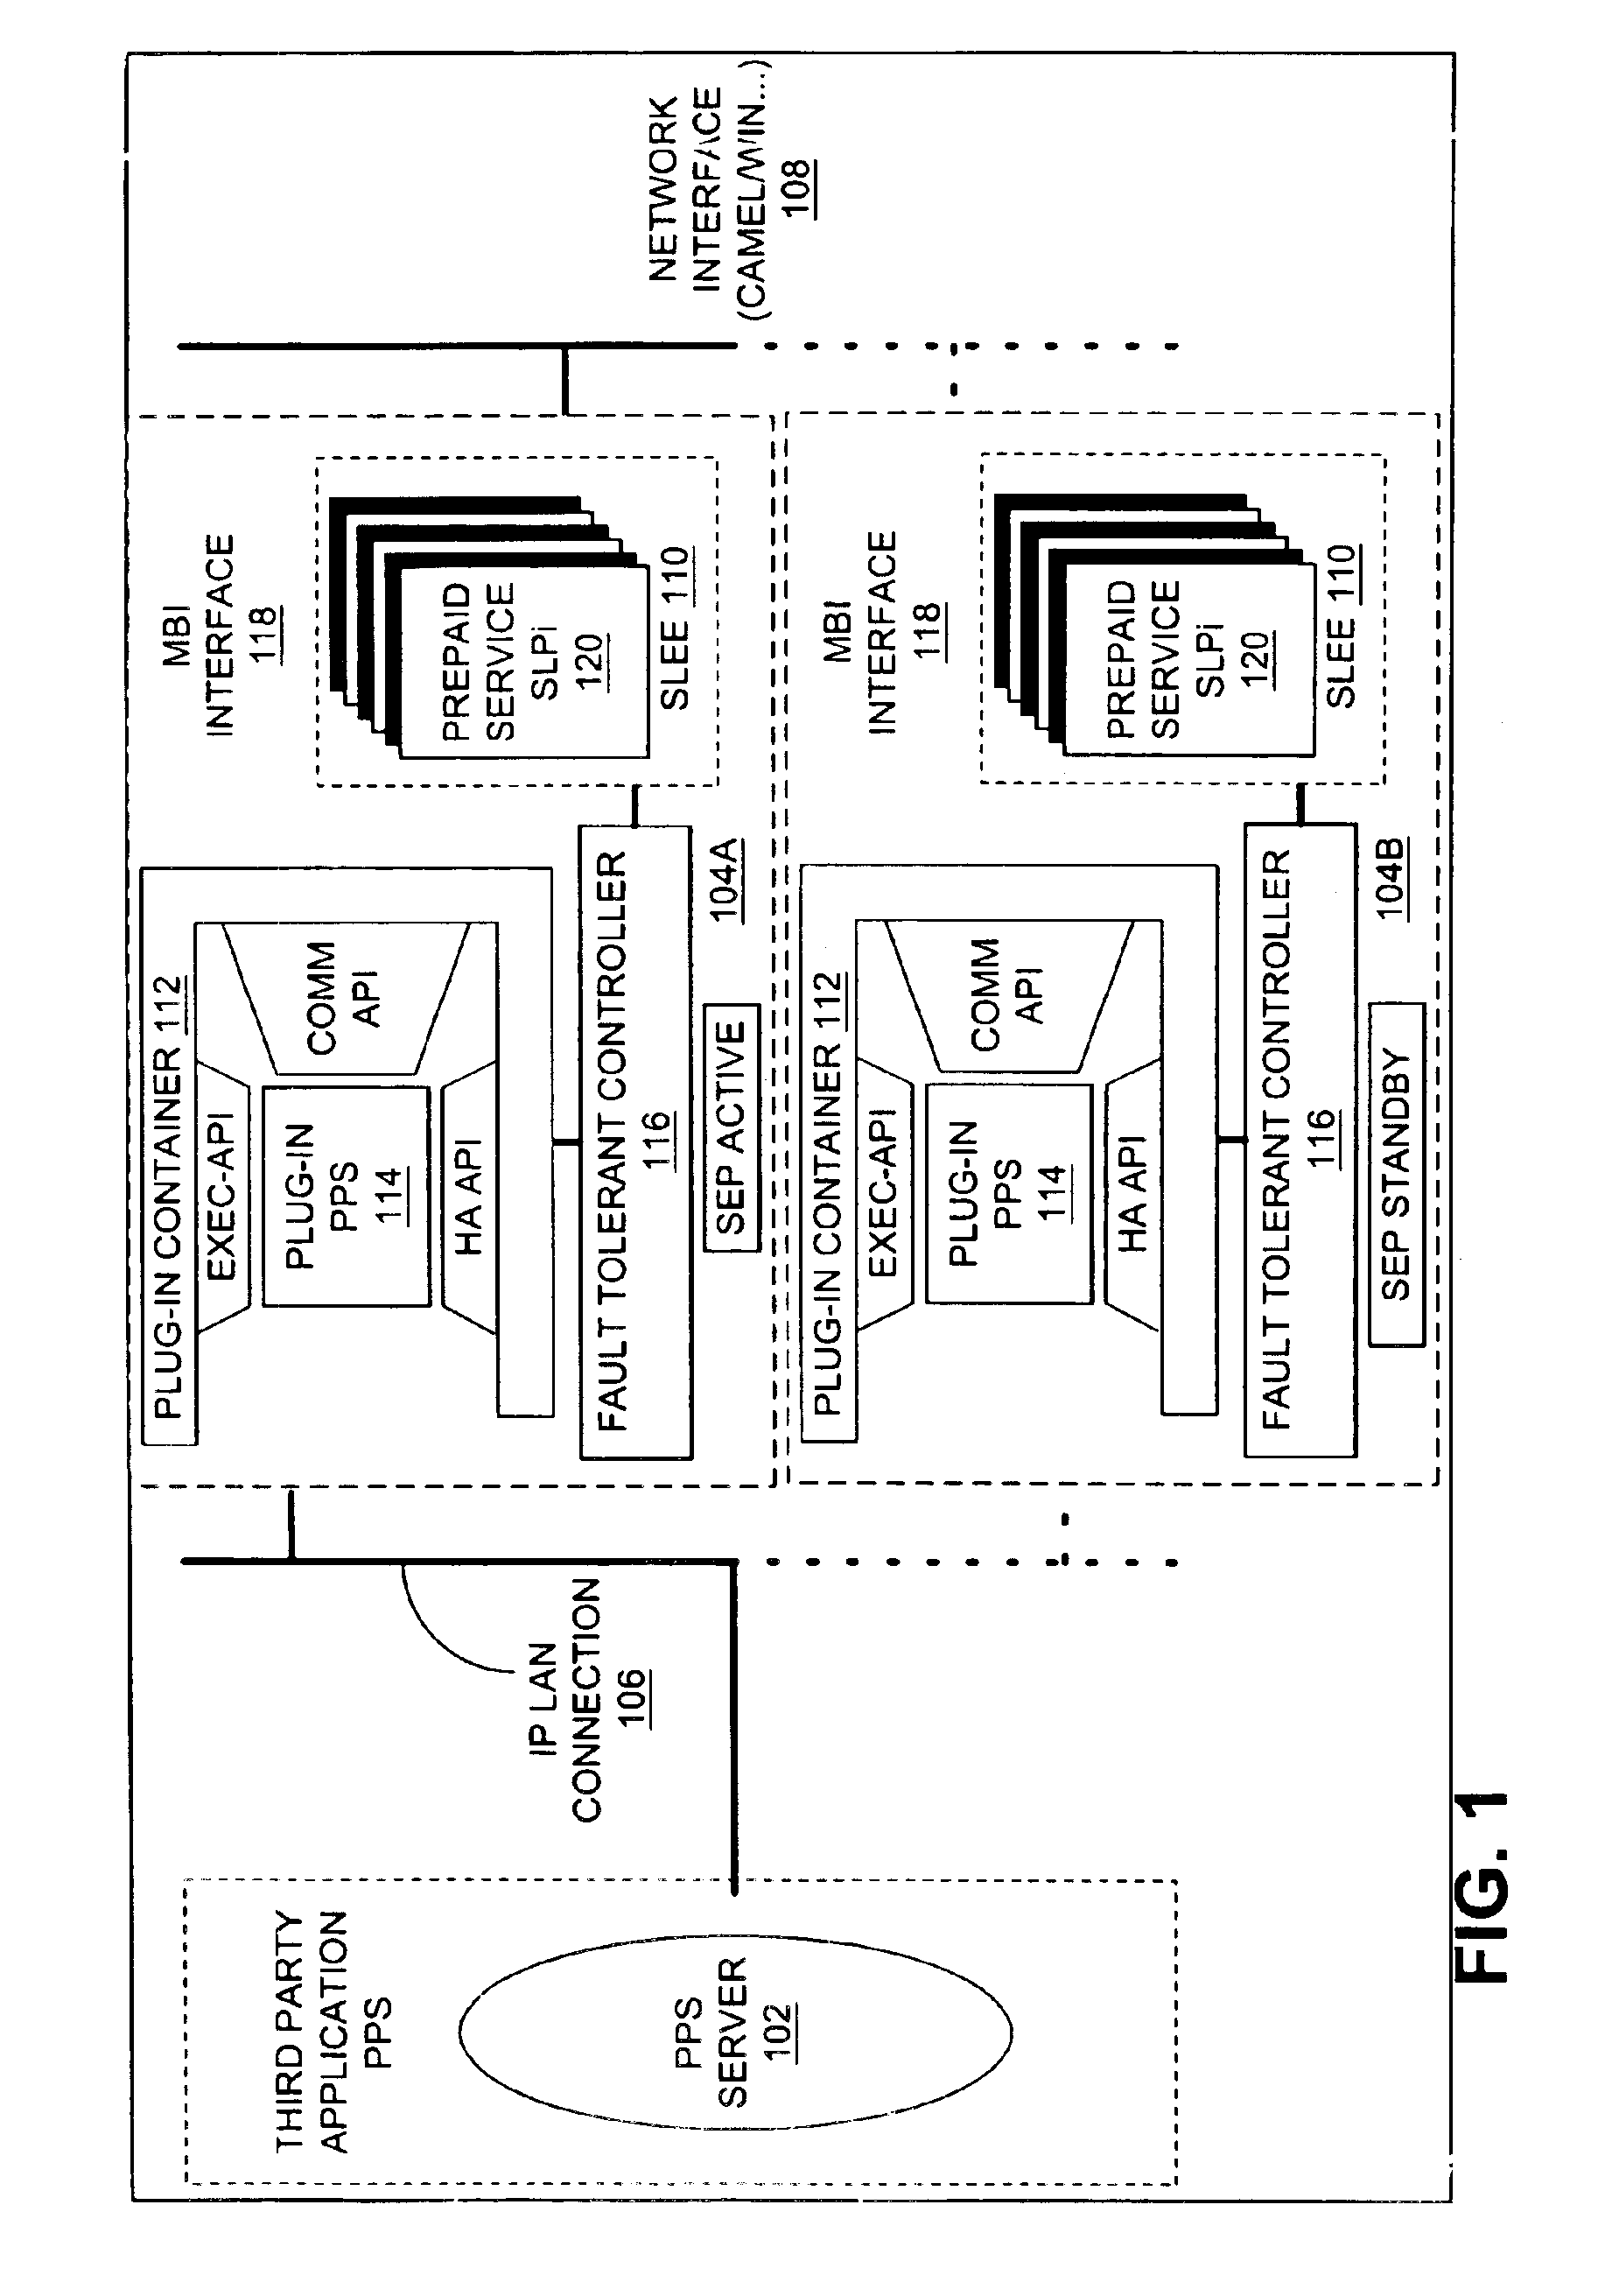 Apparatus and method for telecommunications services